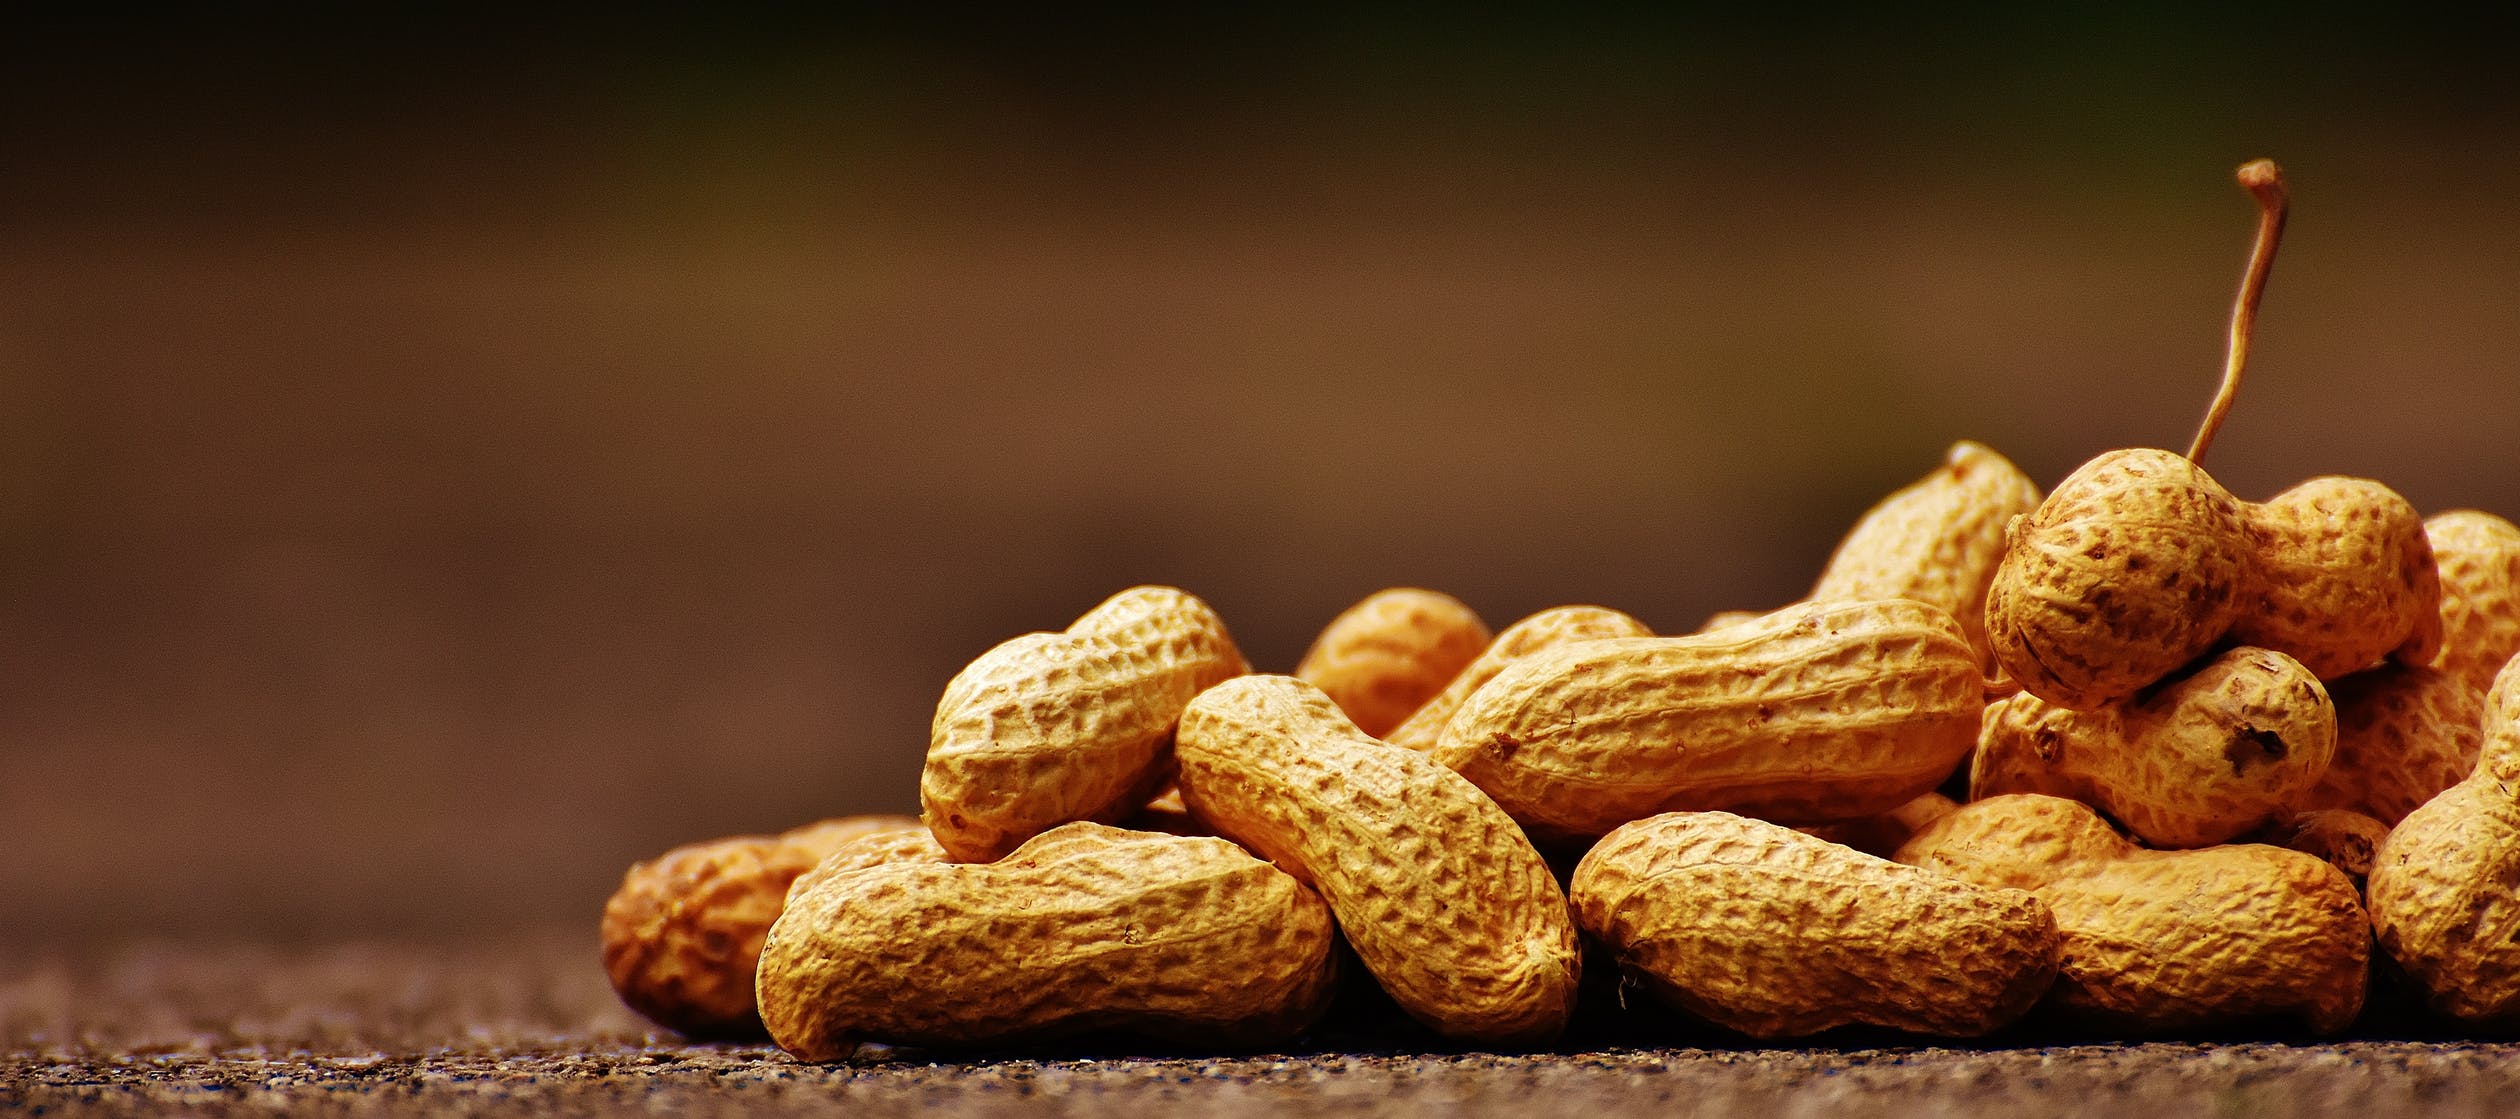 6 Foods to avoid if you have a peanut allergy